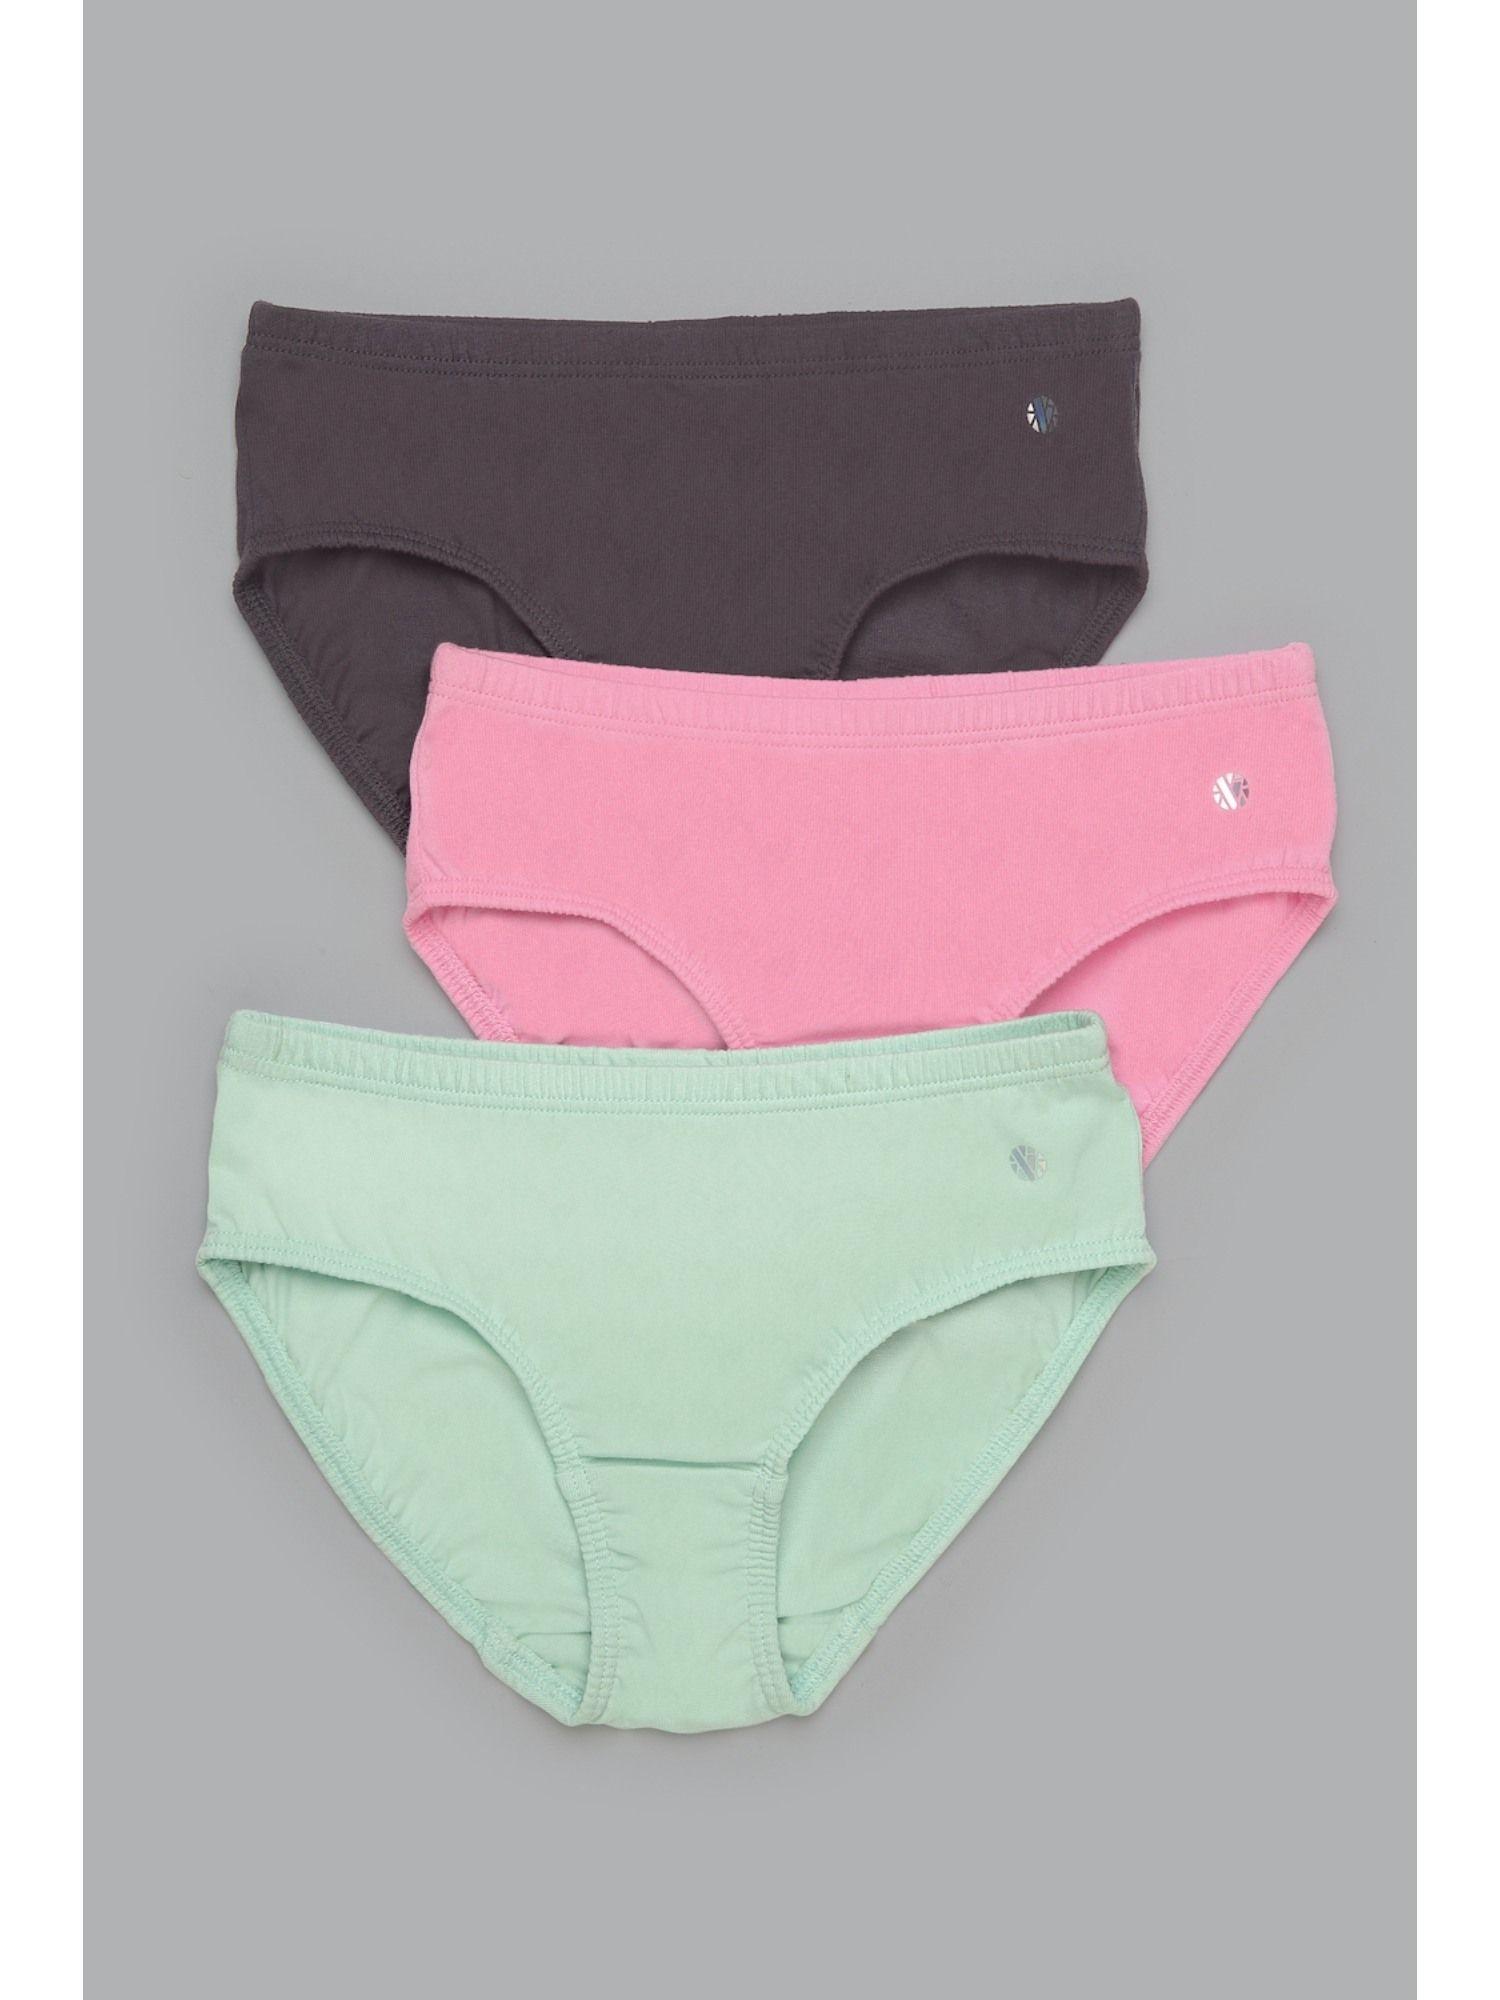 girls pack of 3 ultra soft & no marks waistband hipster panty - assorted